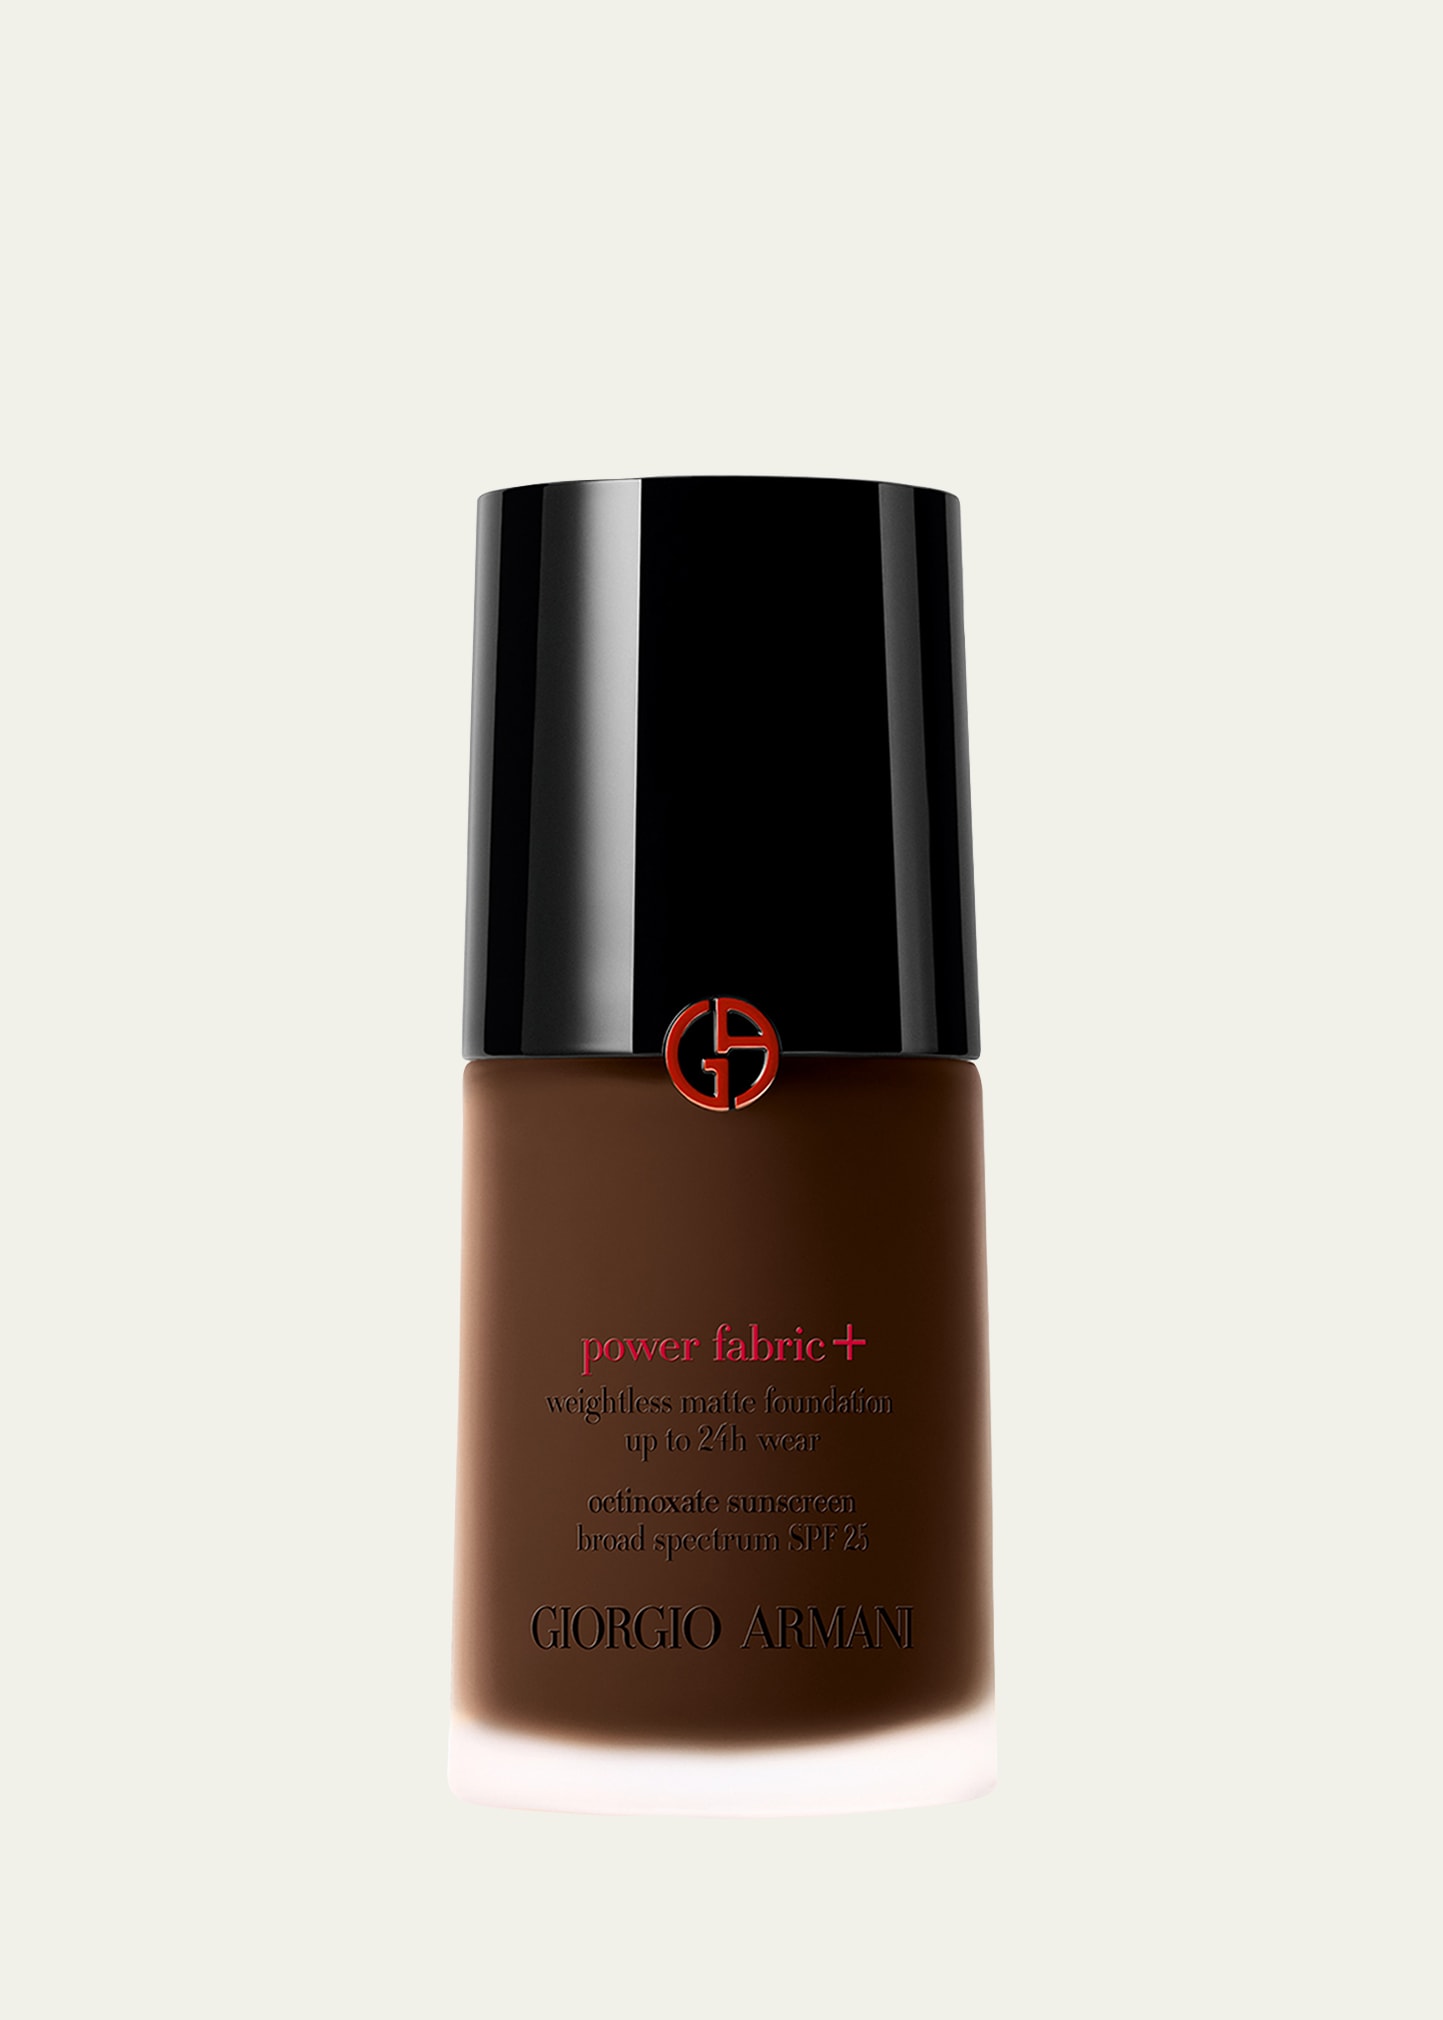 Armani Beauty Power Fabric+ Matte Foundation With Broad-spectrum Spf 25 In 16